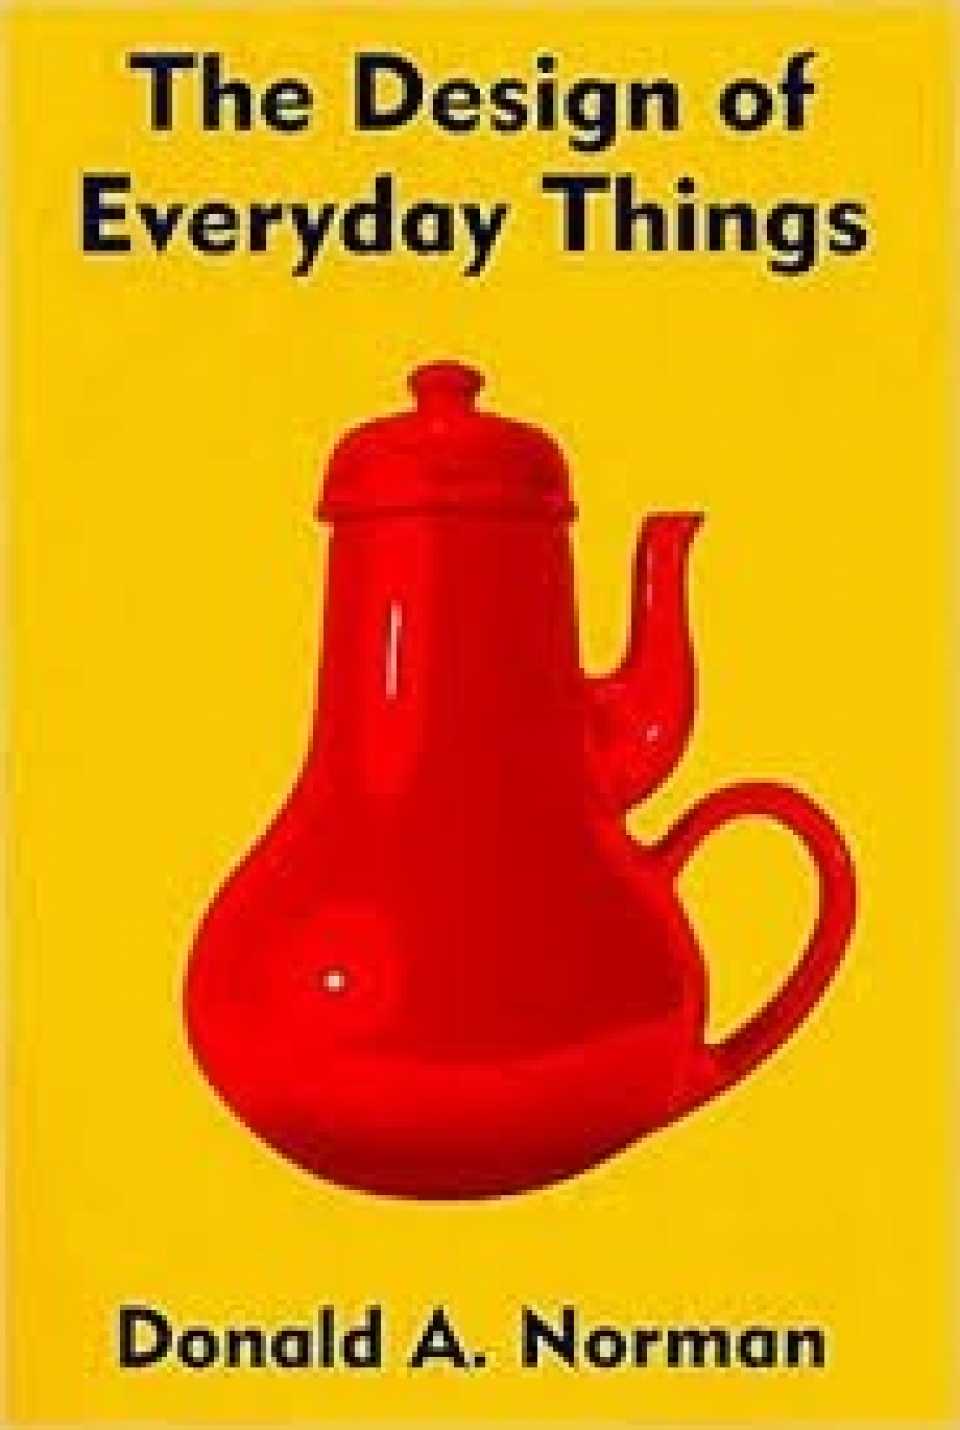 Image of The Design of Everyday Things book